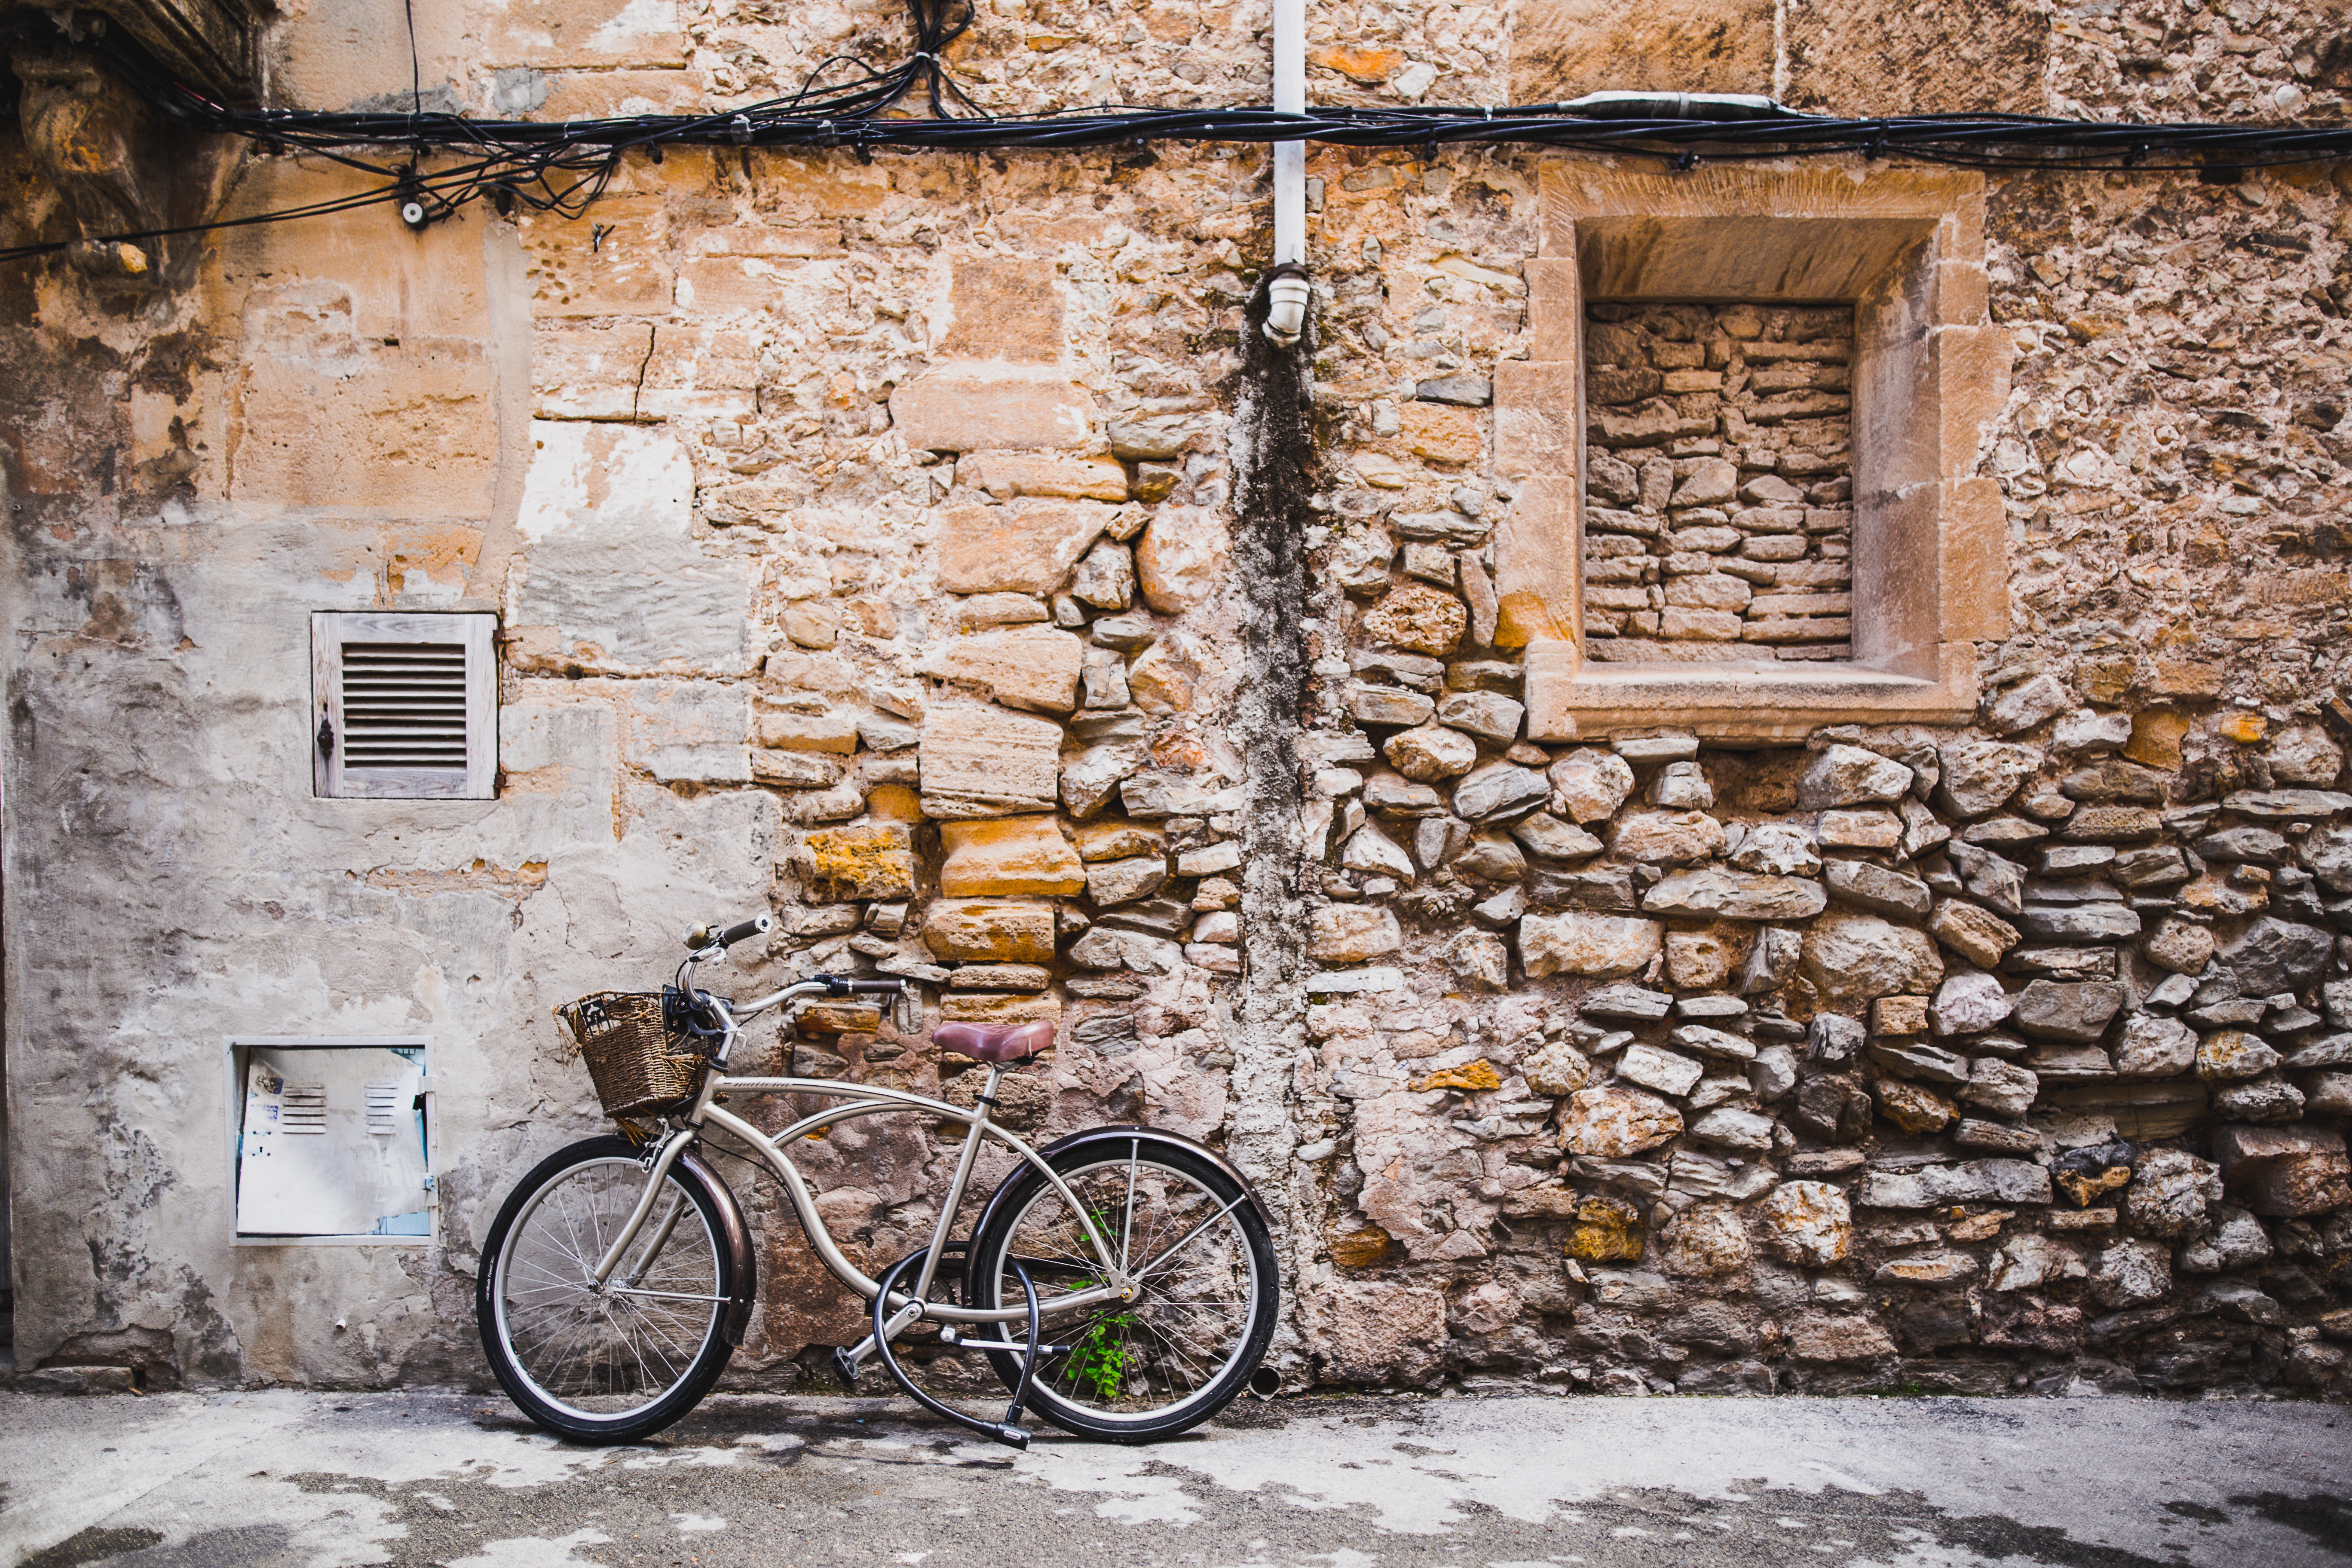 Bike, wall, stones and building